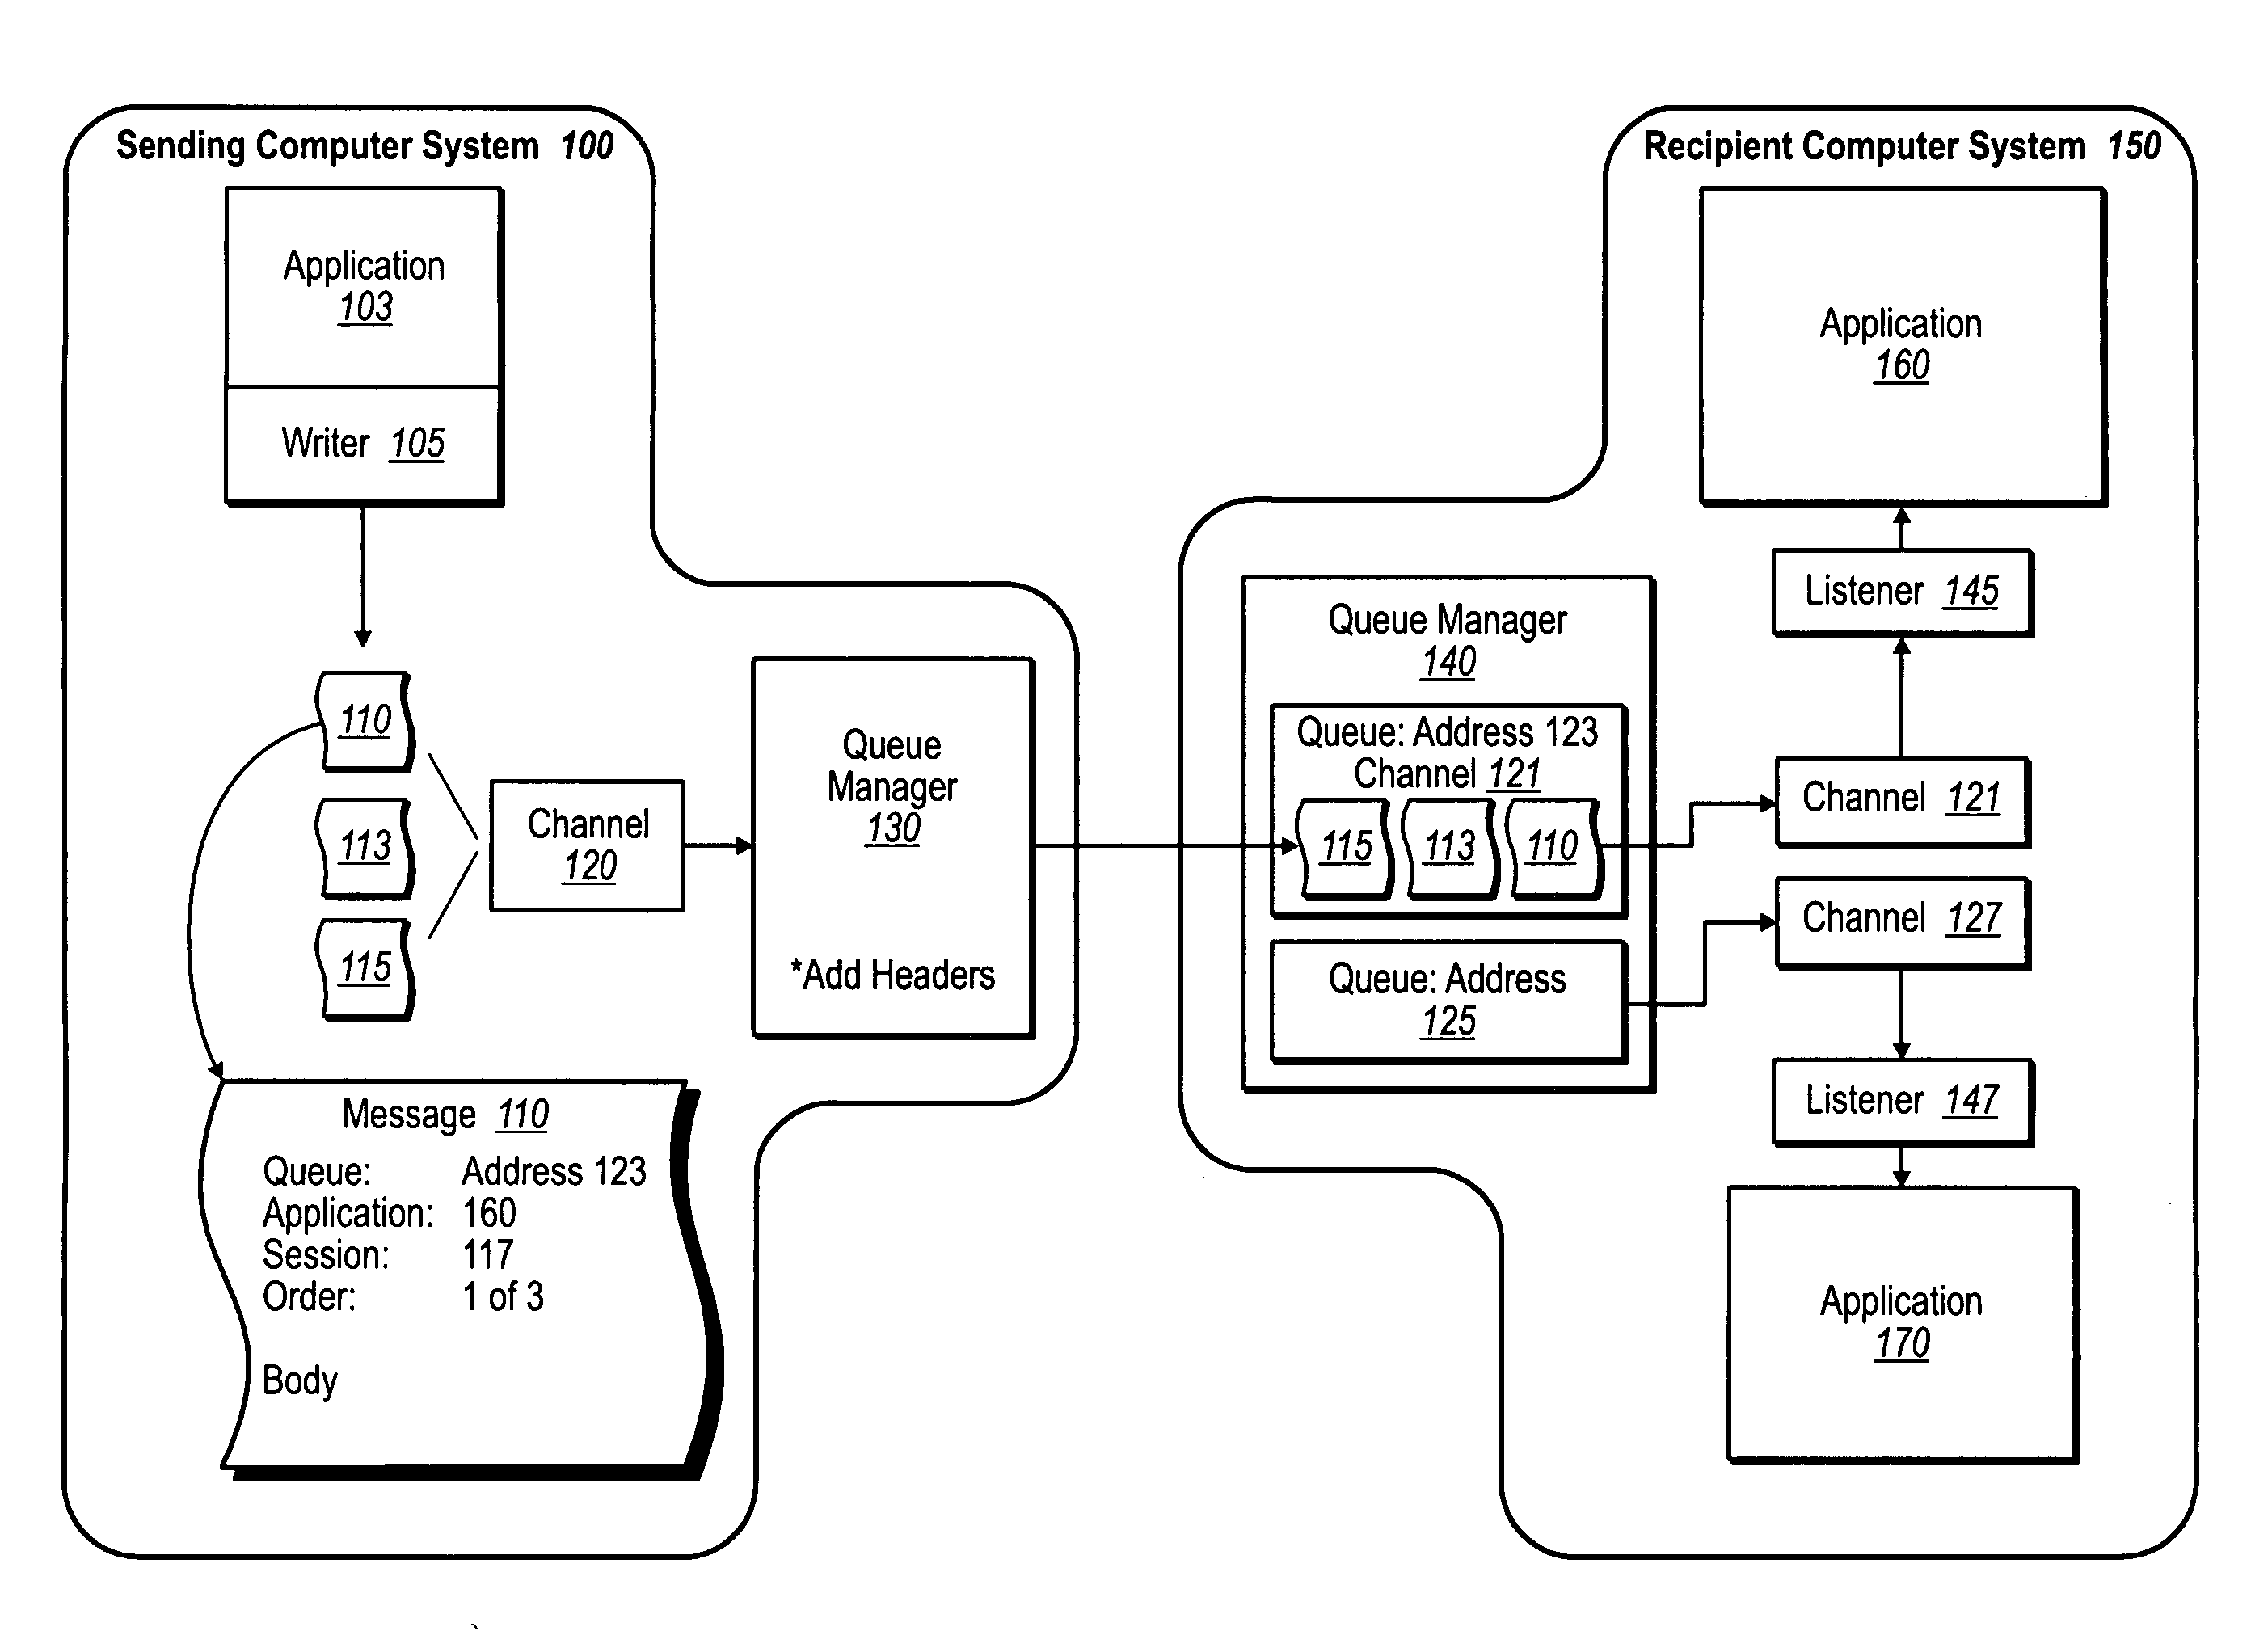 Queued sessions for communicating correlated messages over a network